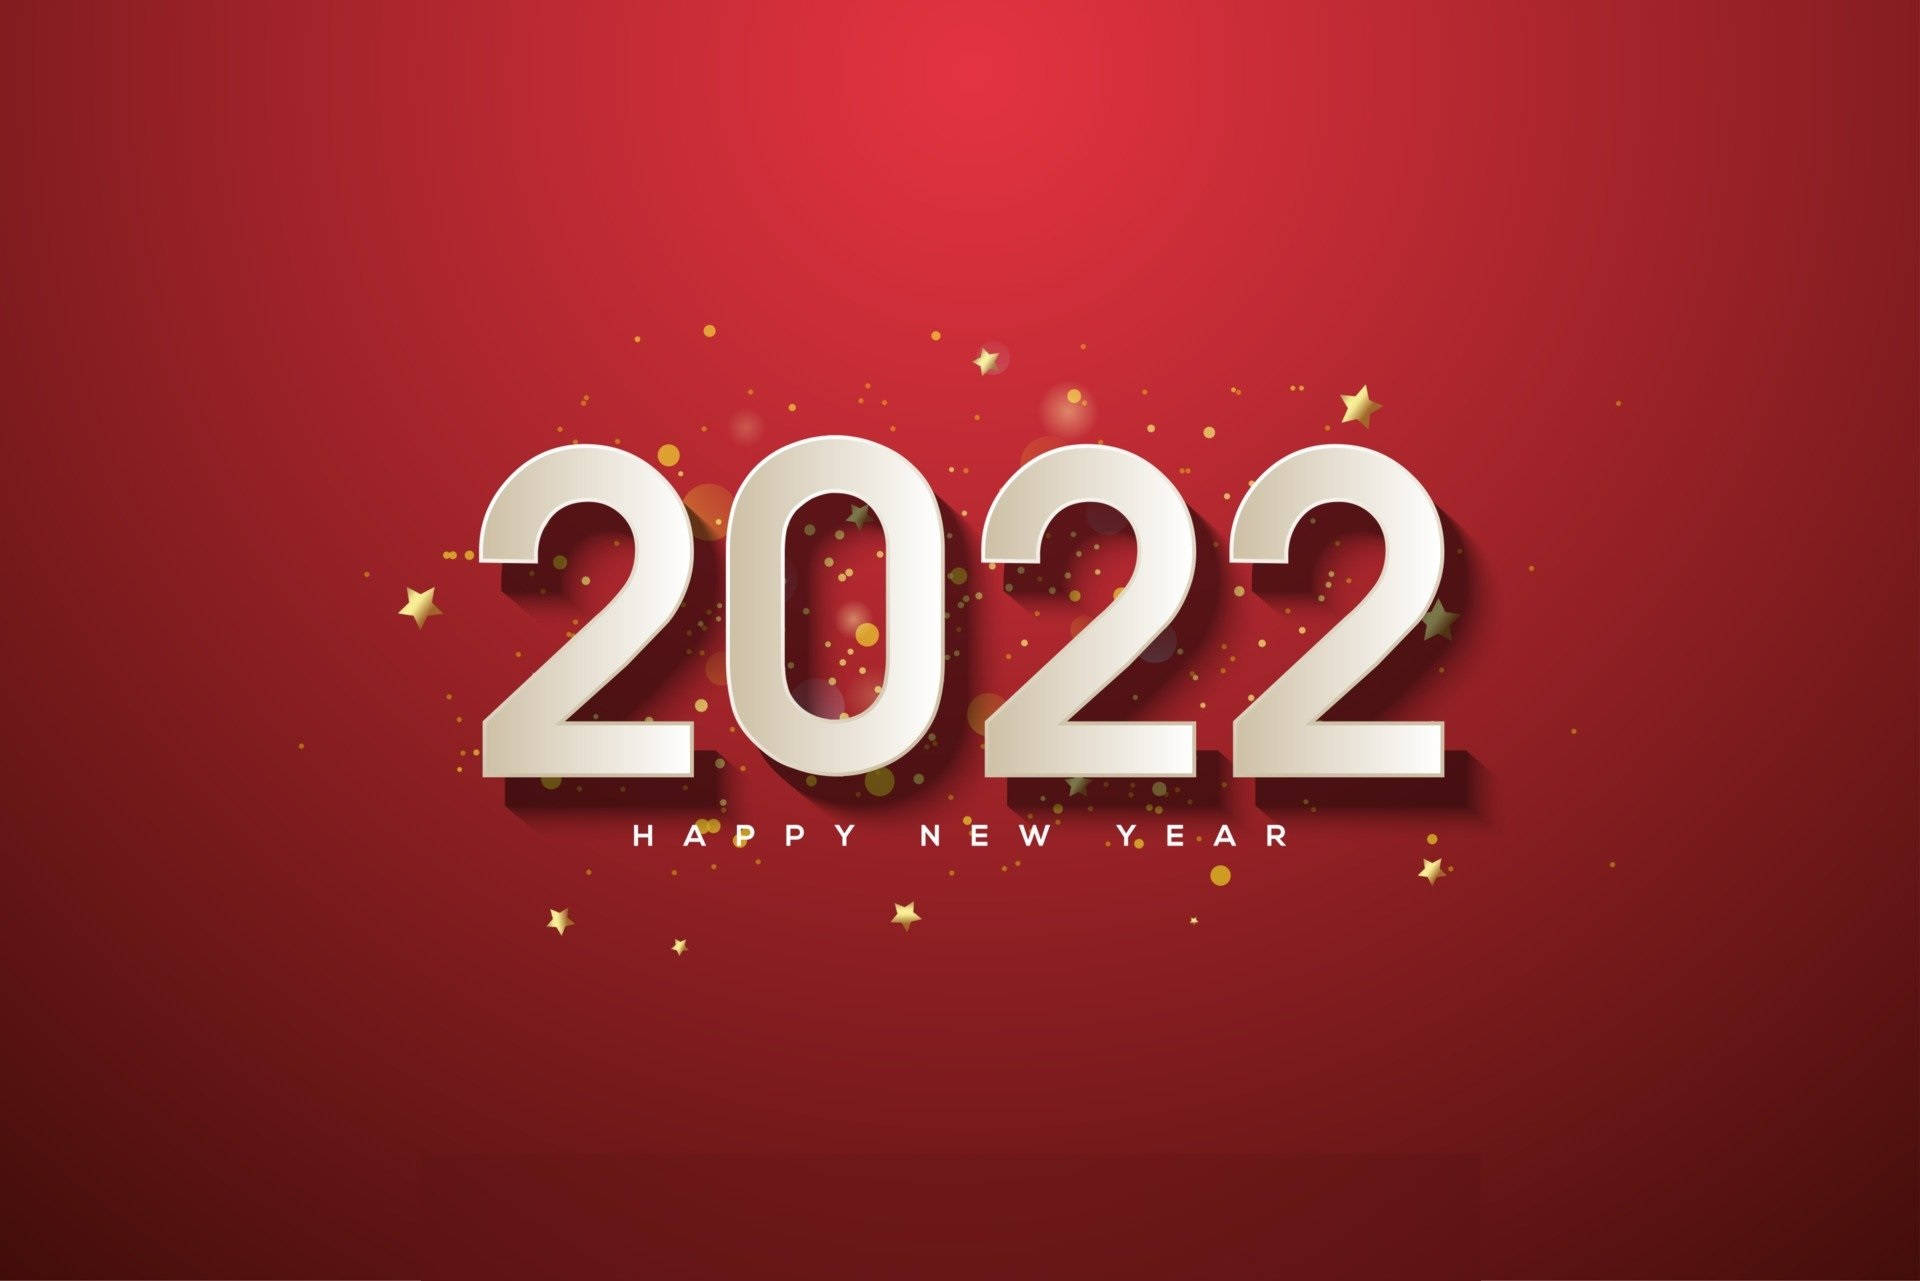 Happy New Year 2022 Red Art